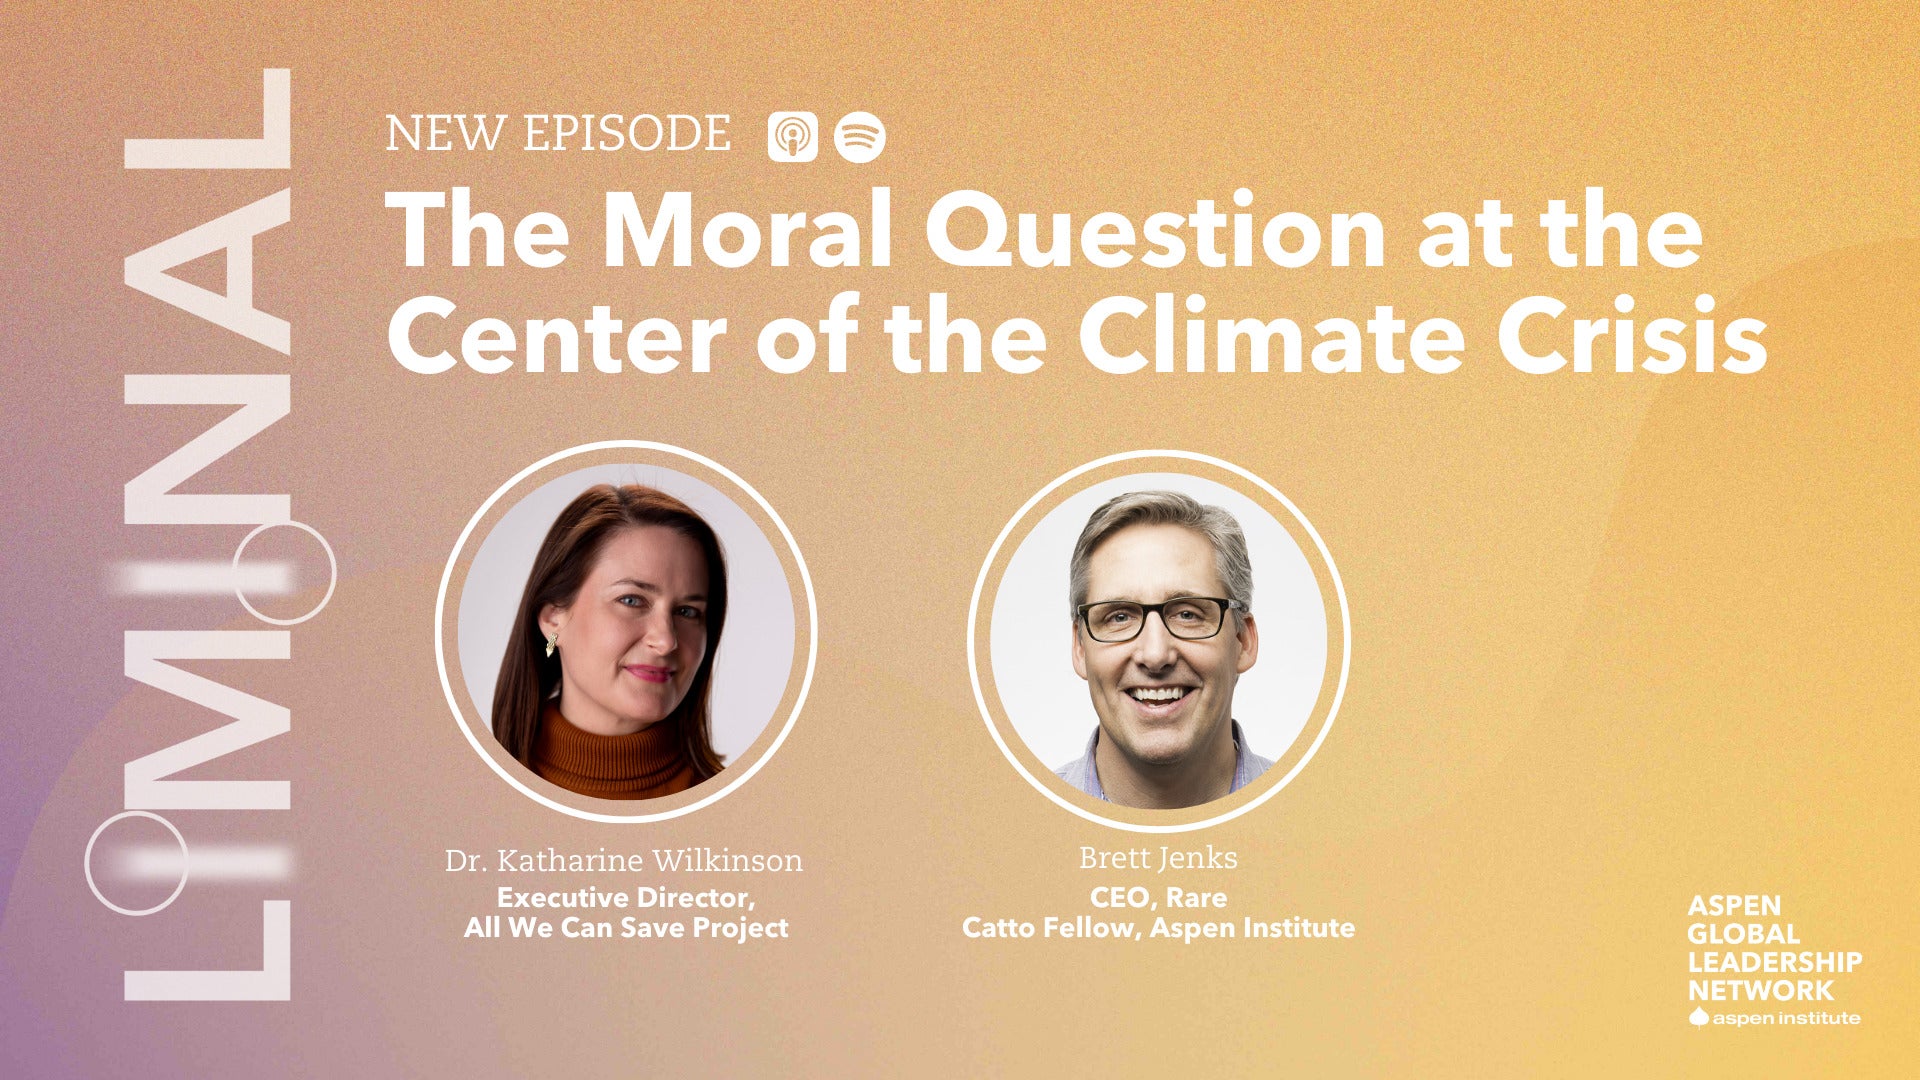 The Moral Question at the Center of the Climate Crisis